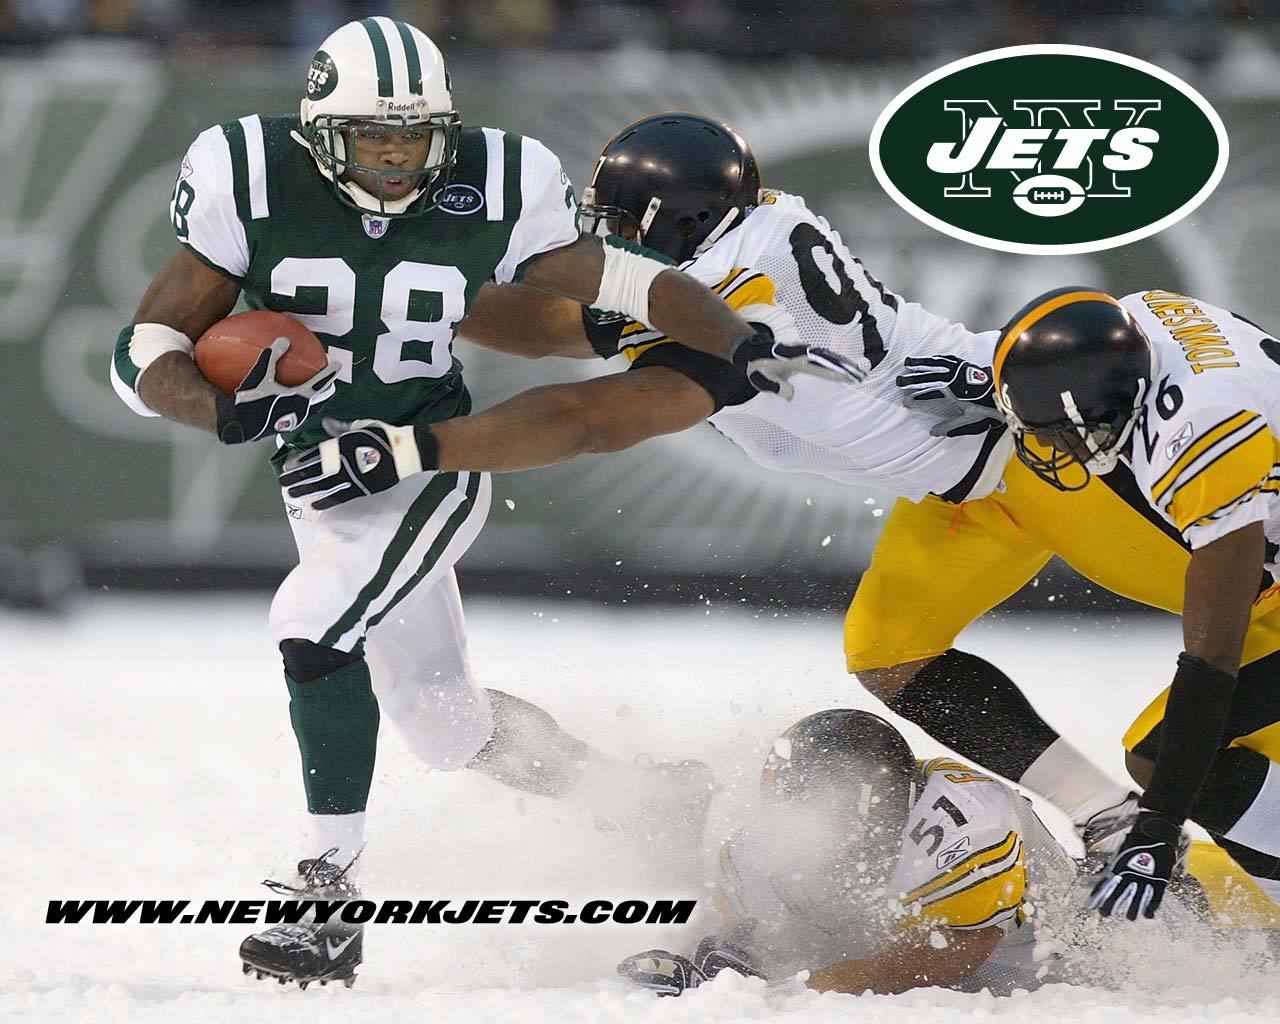  this out our new New York Jets wallpaper New York Jets wallpapers